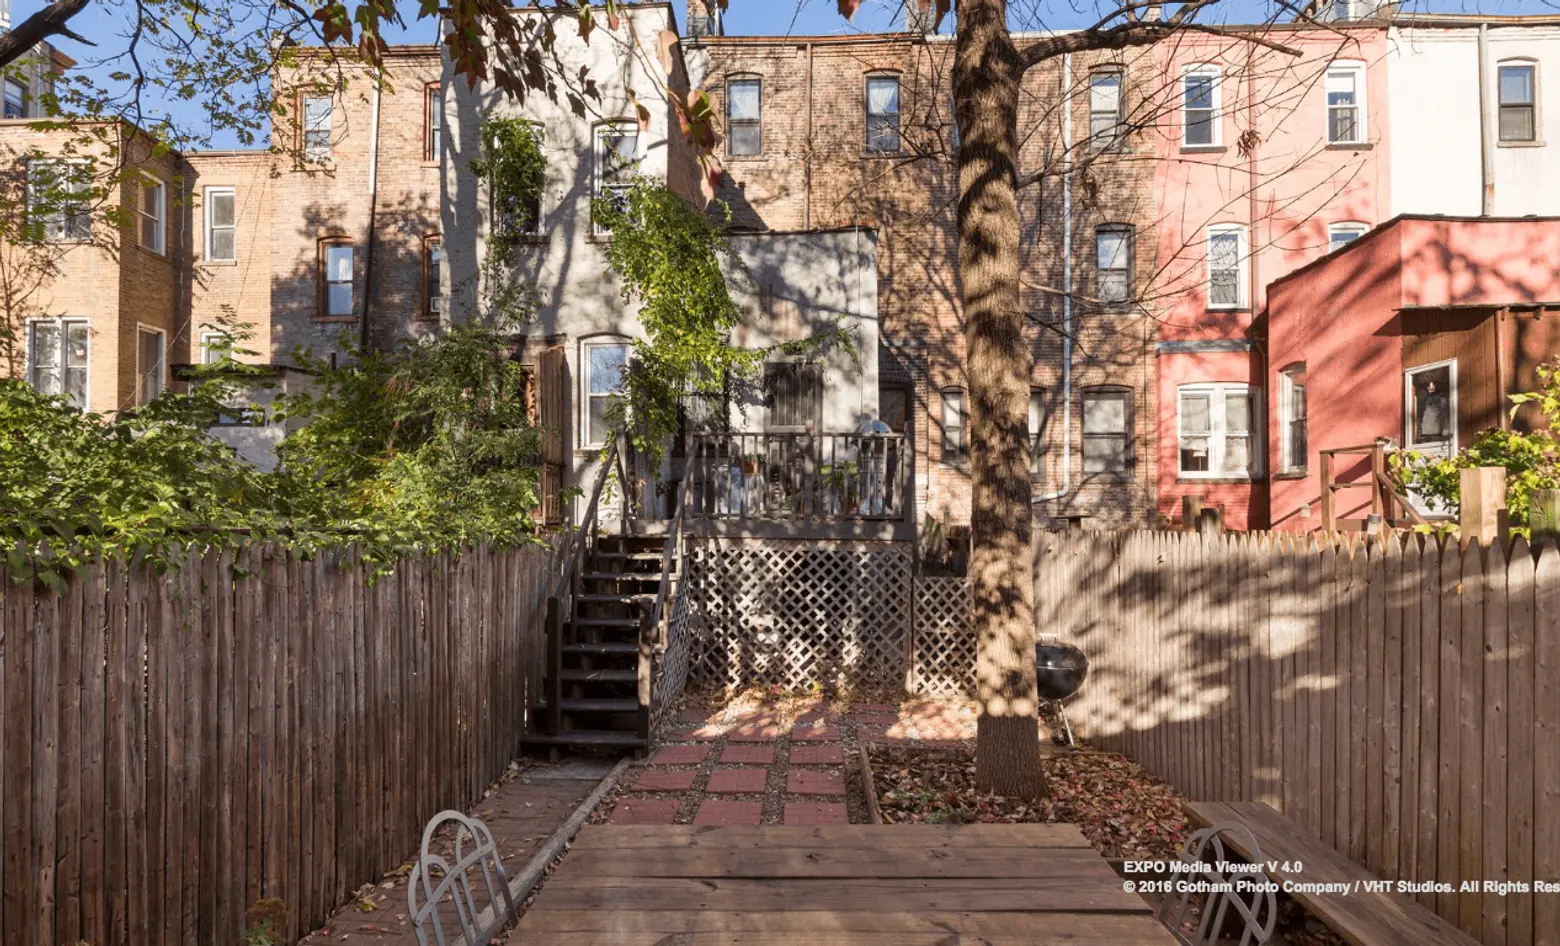 418 East 136th Street, Bronx, Townhouse, townhouses, queen anne, mott haven, historic homes, Bertine Block Historic District, Cool Listings